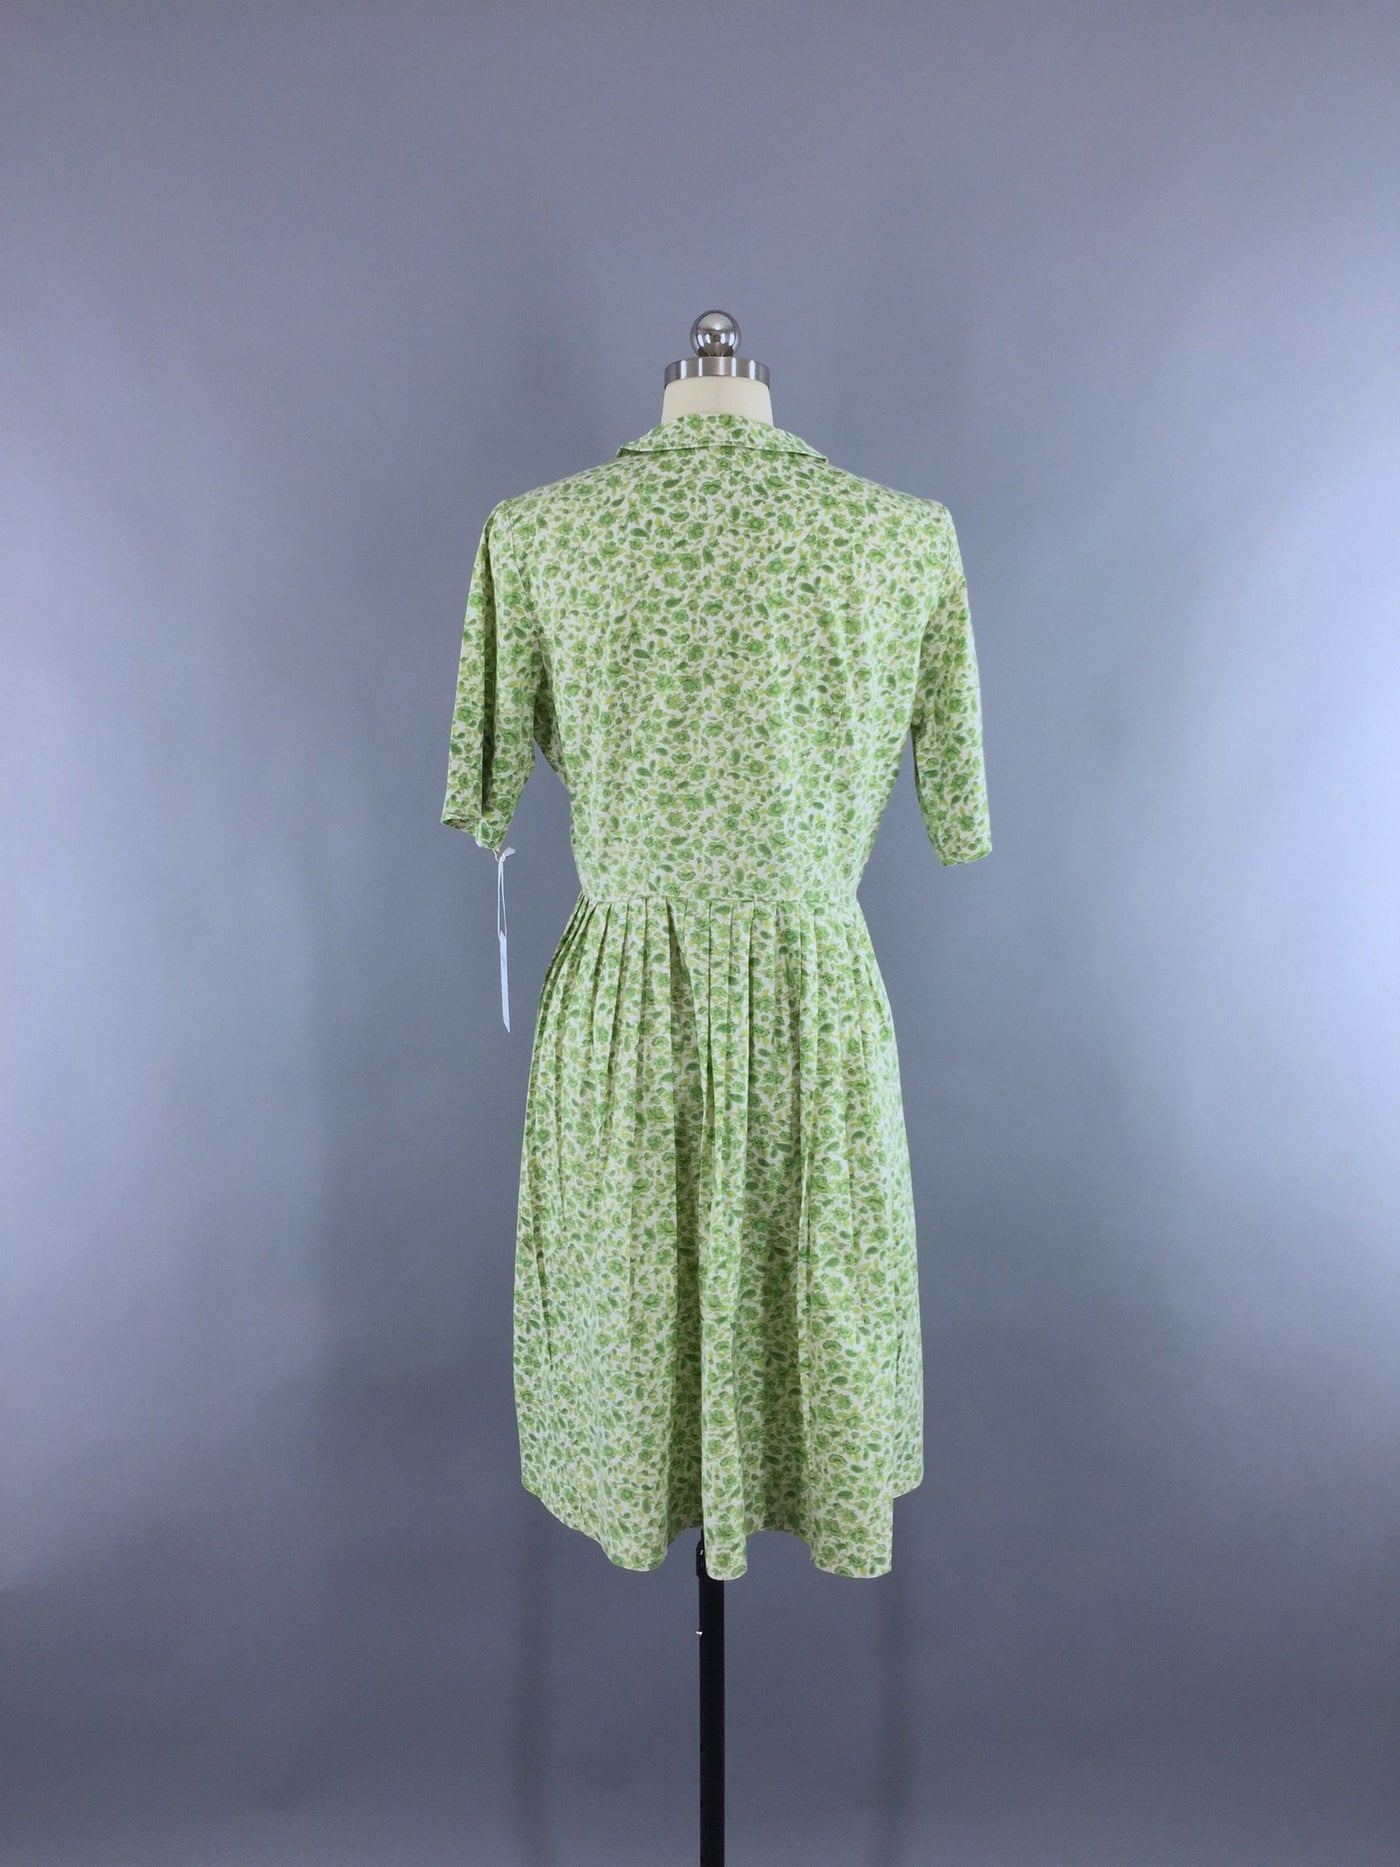 Vintage 1960s Day Dress / Green Floral Print Cotton - ThisBlueBird